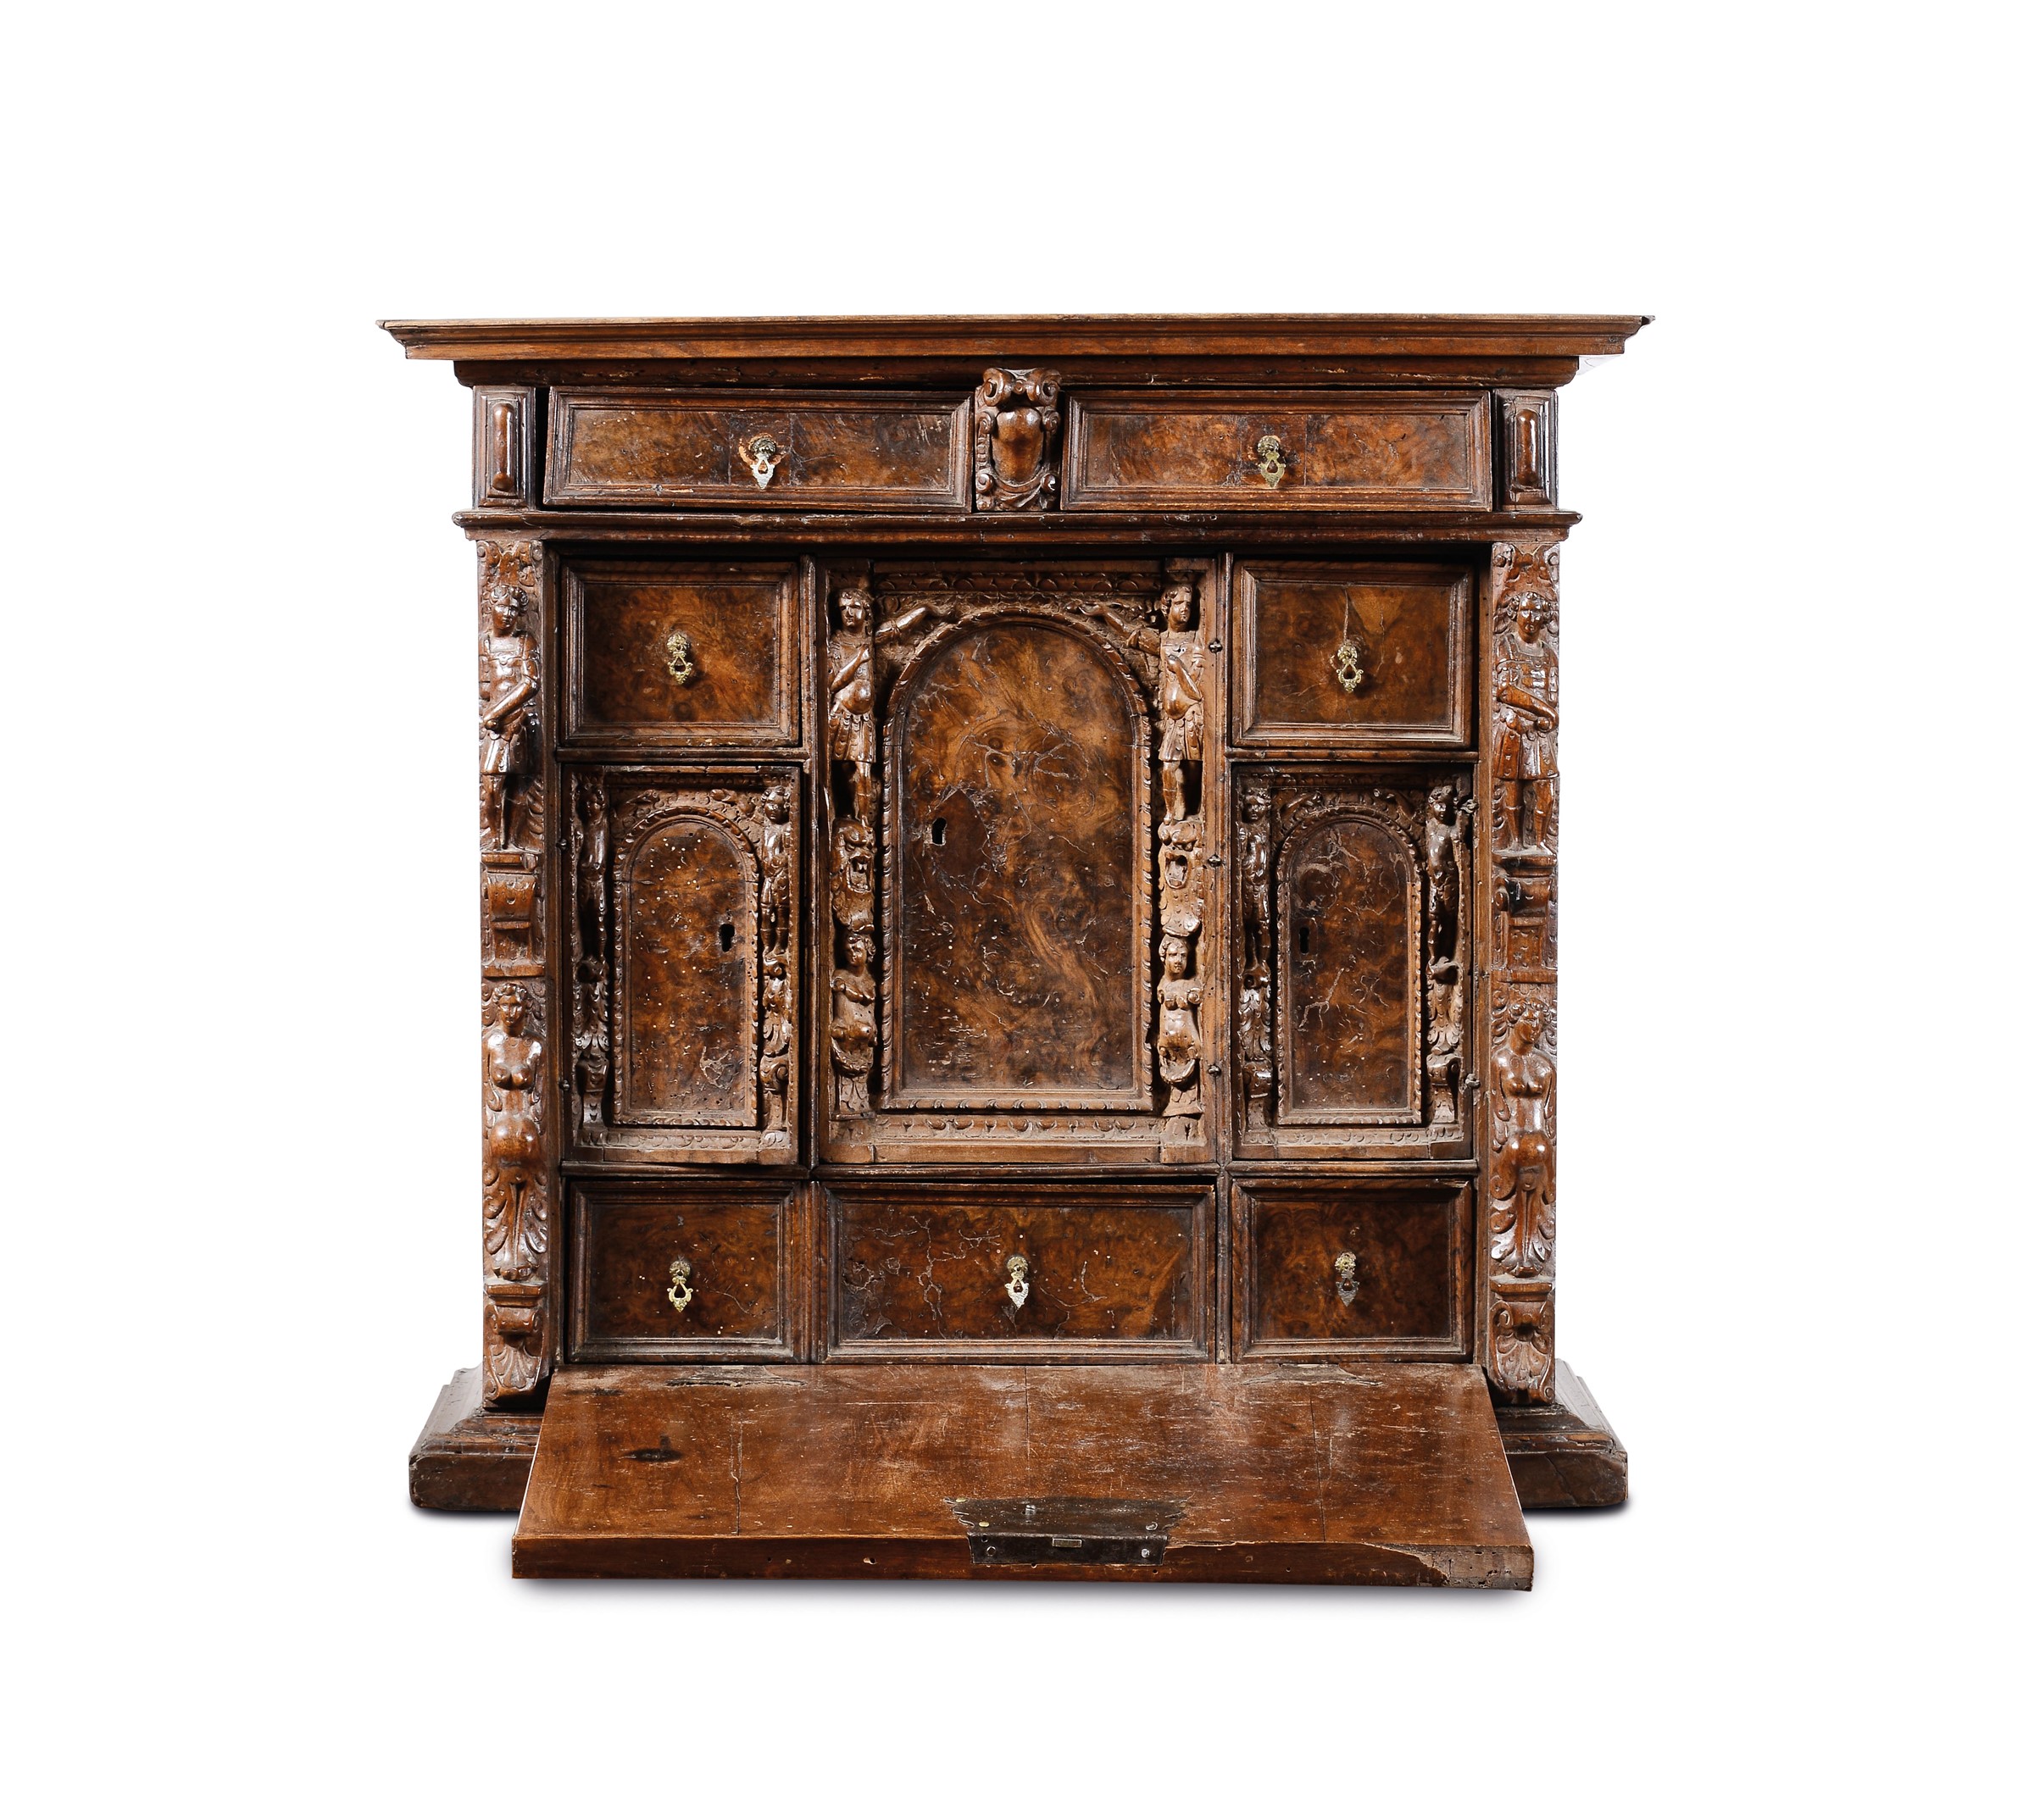 A cabinet with ancient elements - A two-part cabinet in carved wood made with [...] - Image 2 of 2